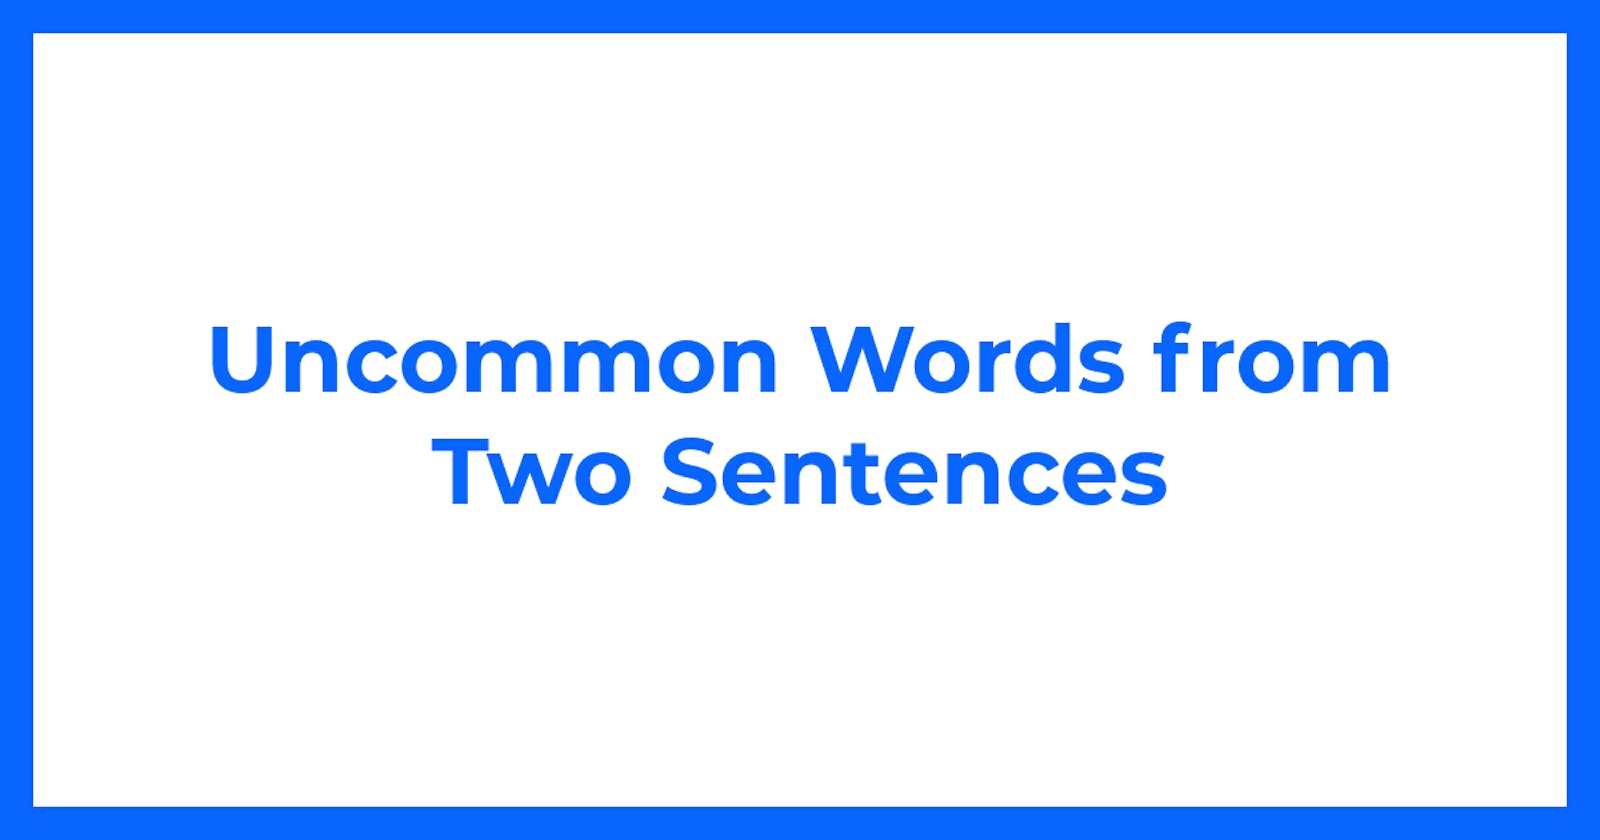 Uncommon Words from Two Sentences